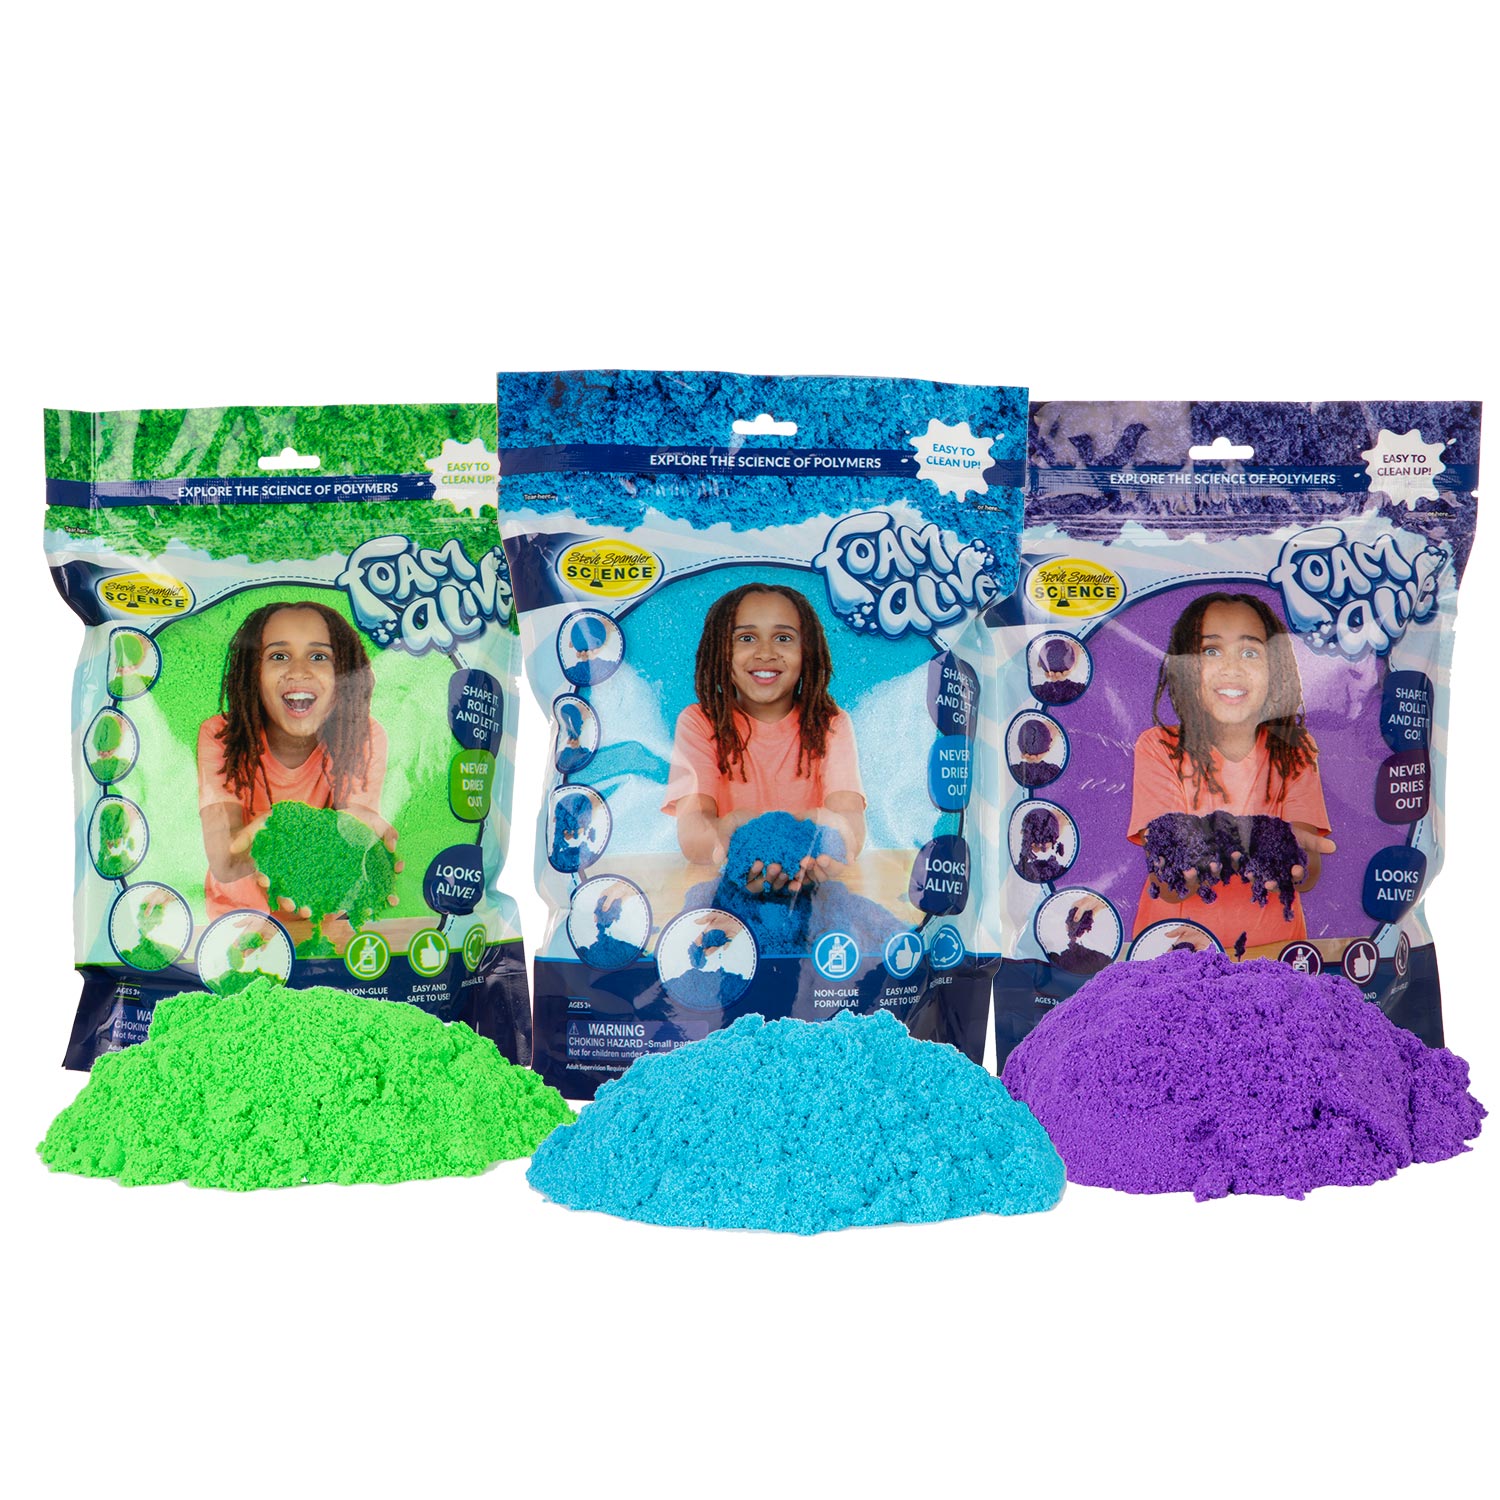 Hands-On STEM Learning Activity Steve Spangler Science Foam Alive Fun & Easy Science Experiment Kit Learn About Polymers & Non-Newtonian Substances Green 1lb Bag at-Home Science Kit for Kids 